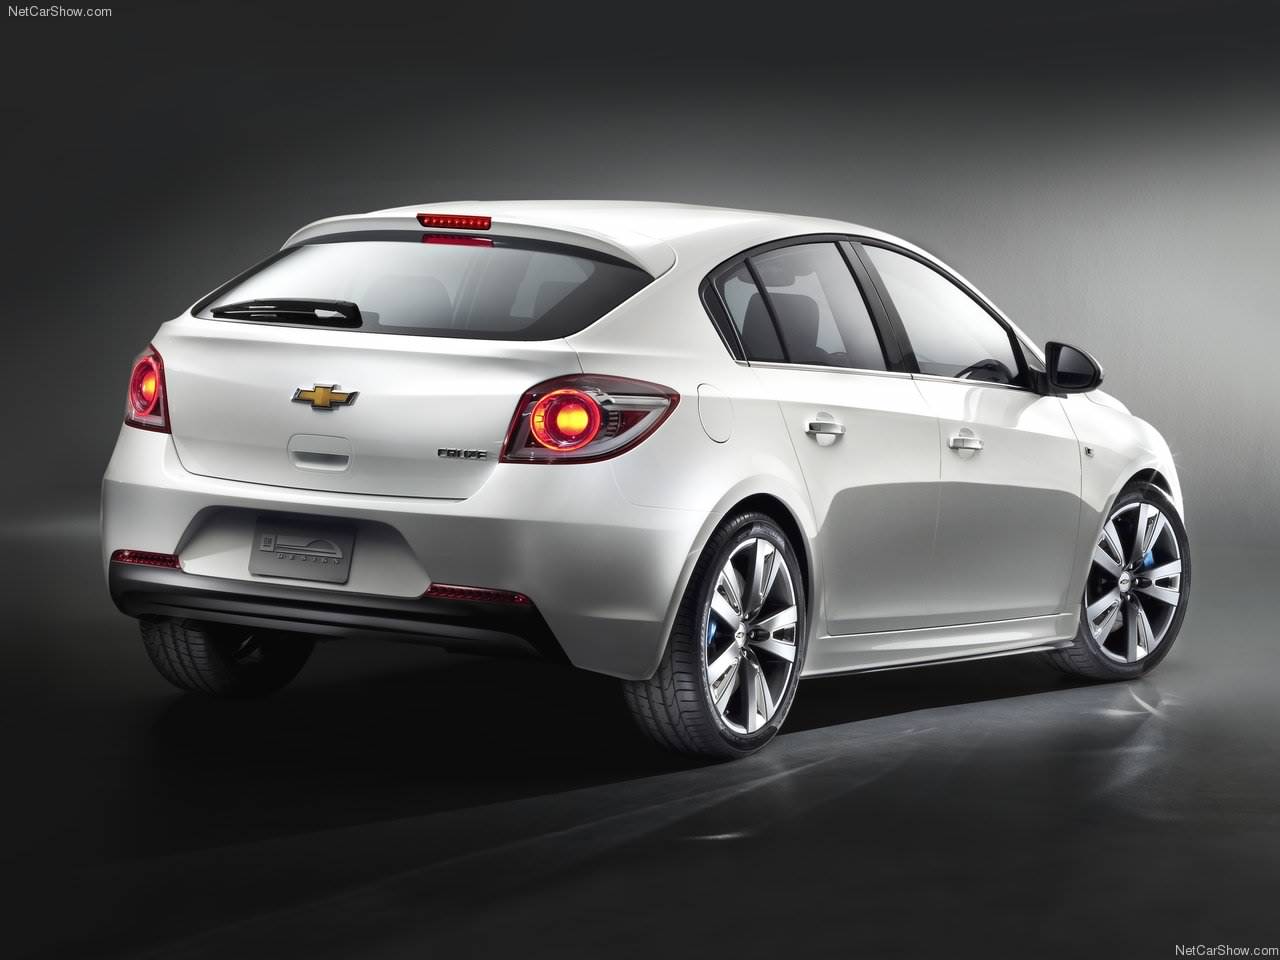 2012 Chevrolet Cruze Hatchback Awesome view